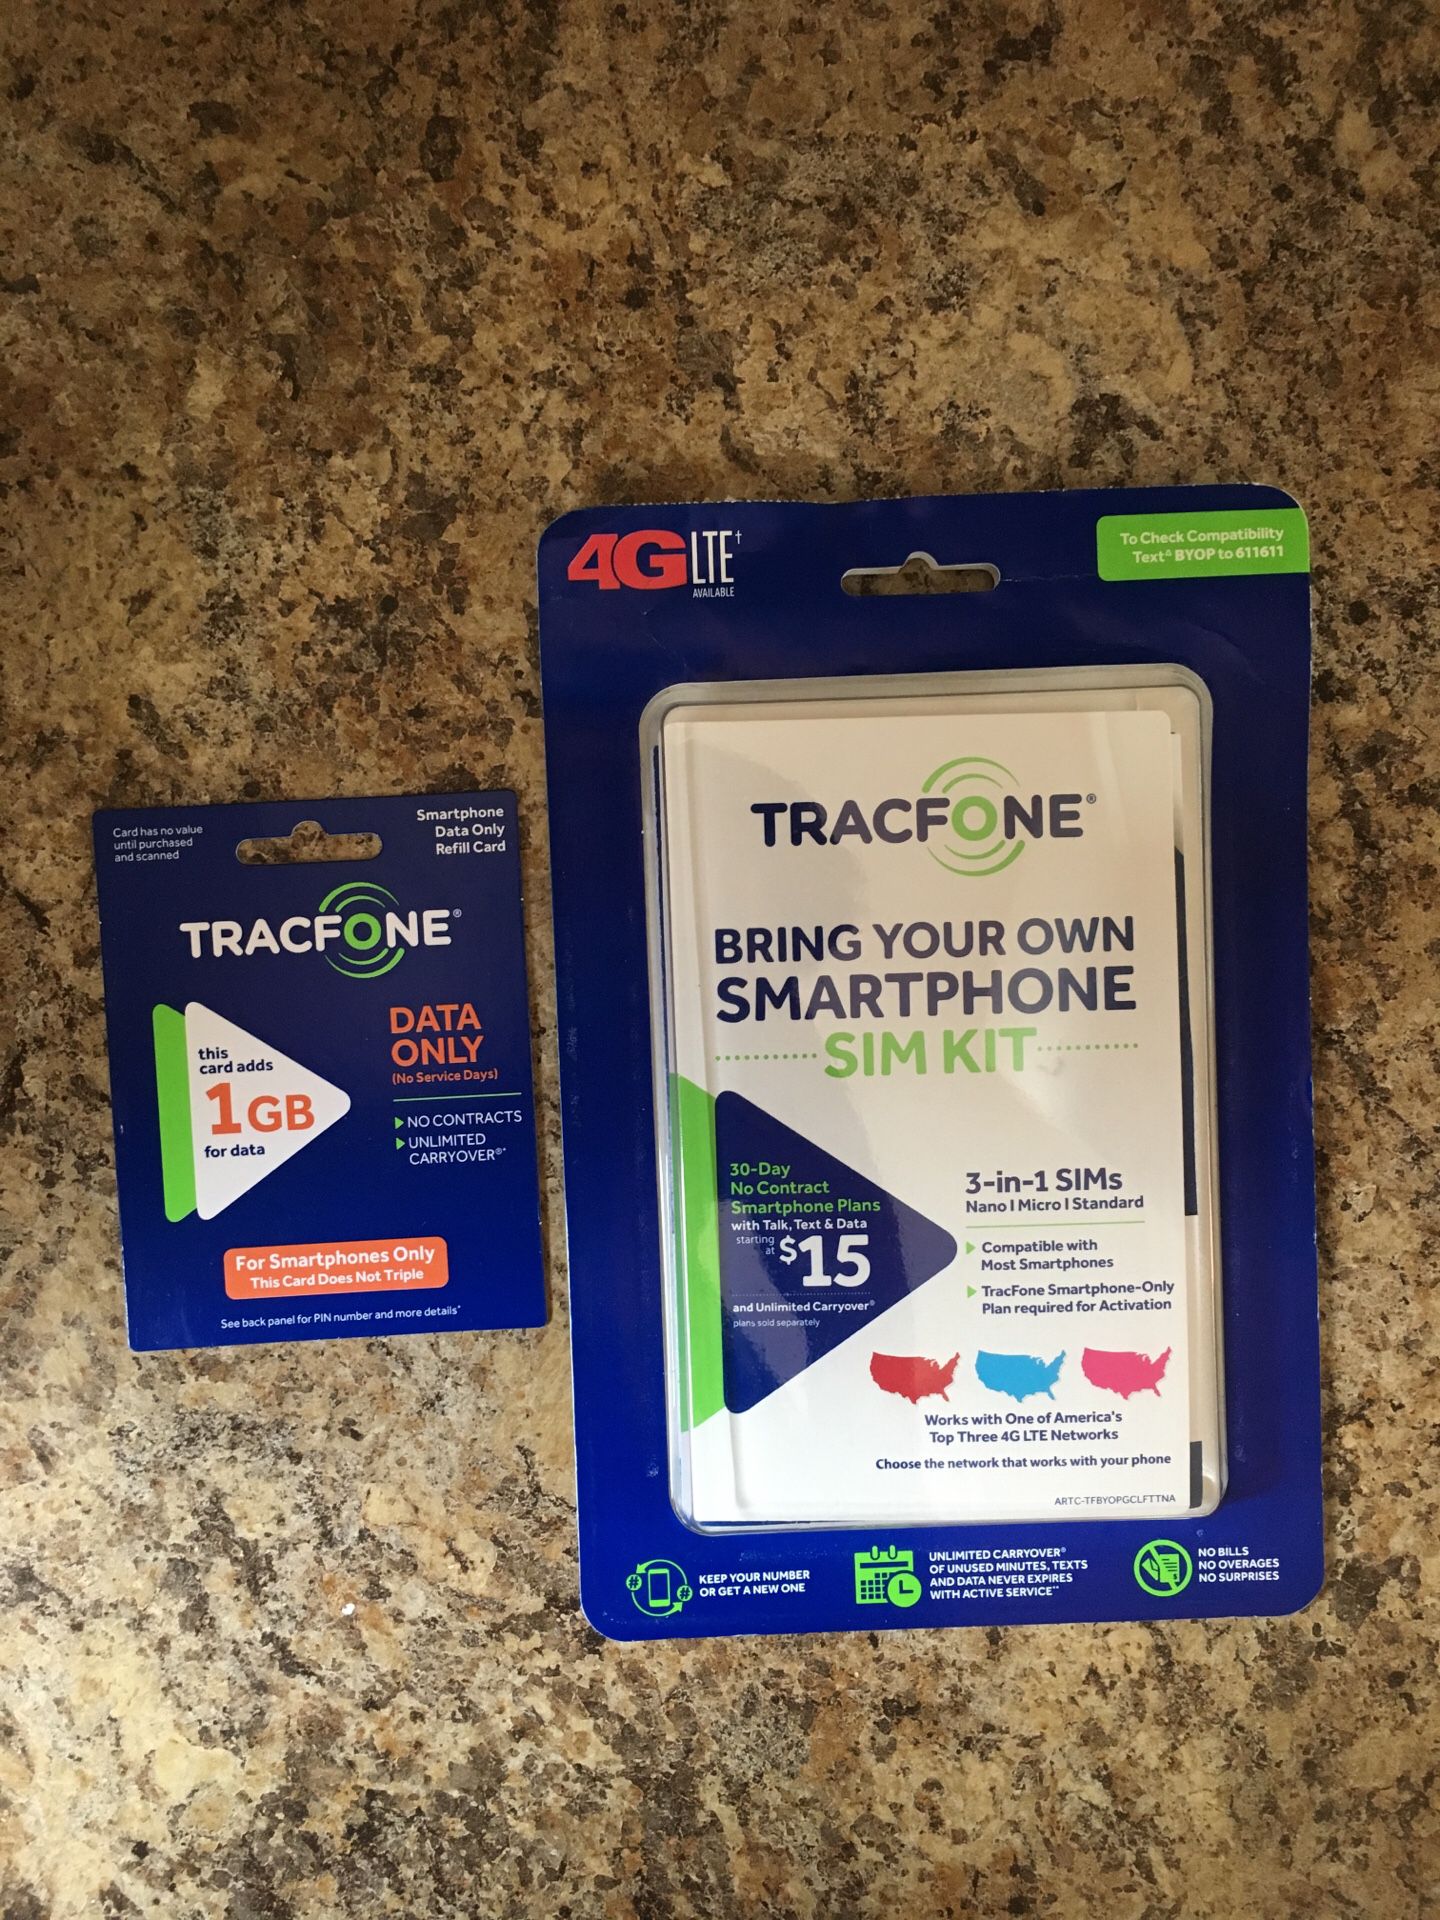 Tracfone Byod kit and data Card